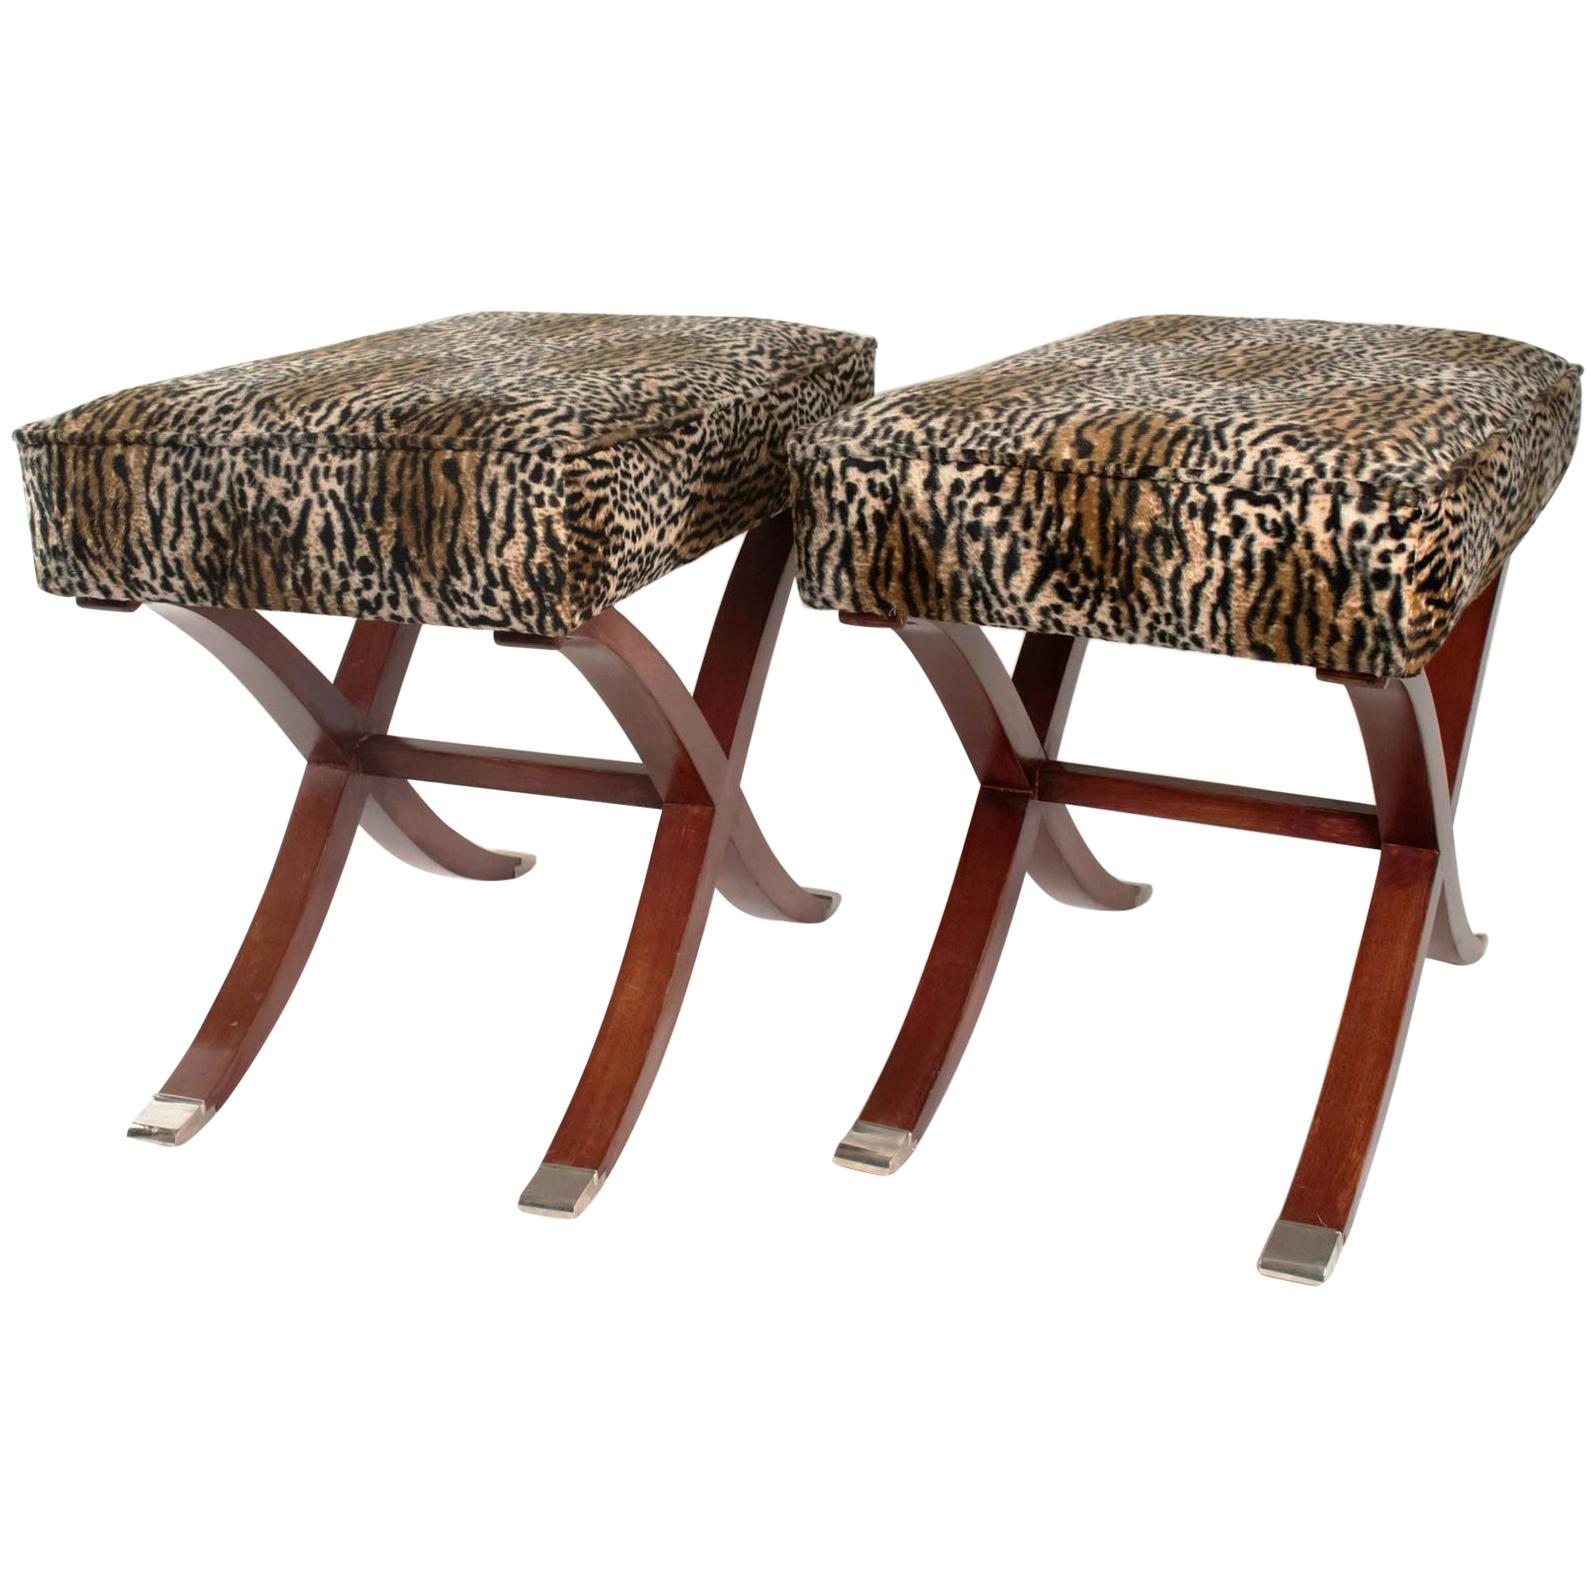 Spectacular Pair of Art Deco Style x Shaped Stools, France, Late 20th Century